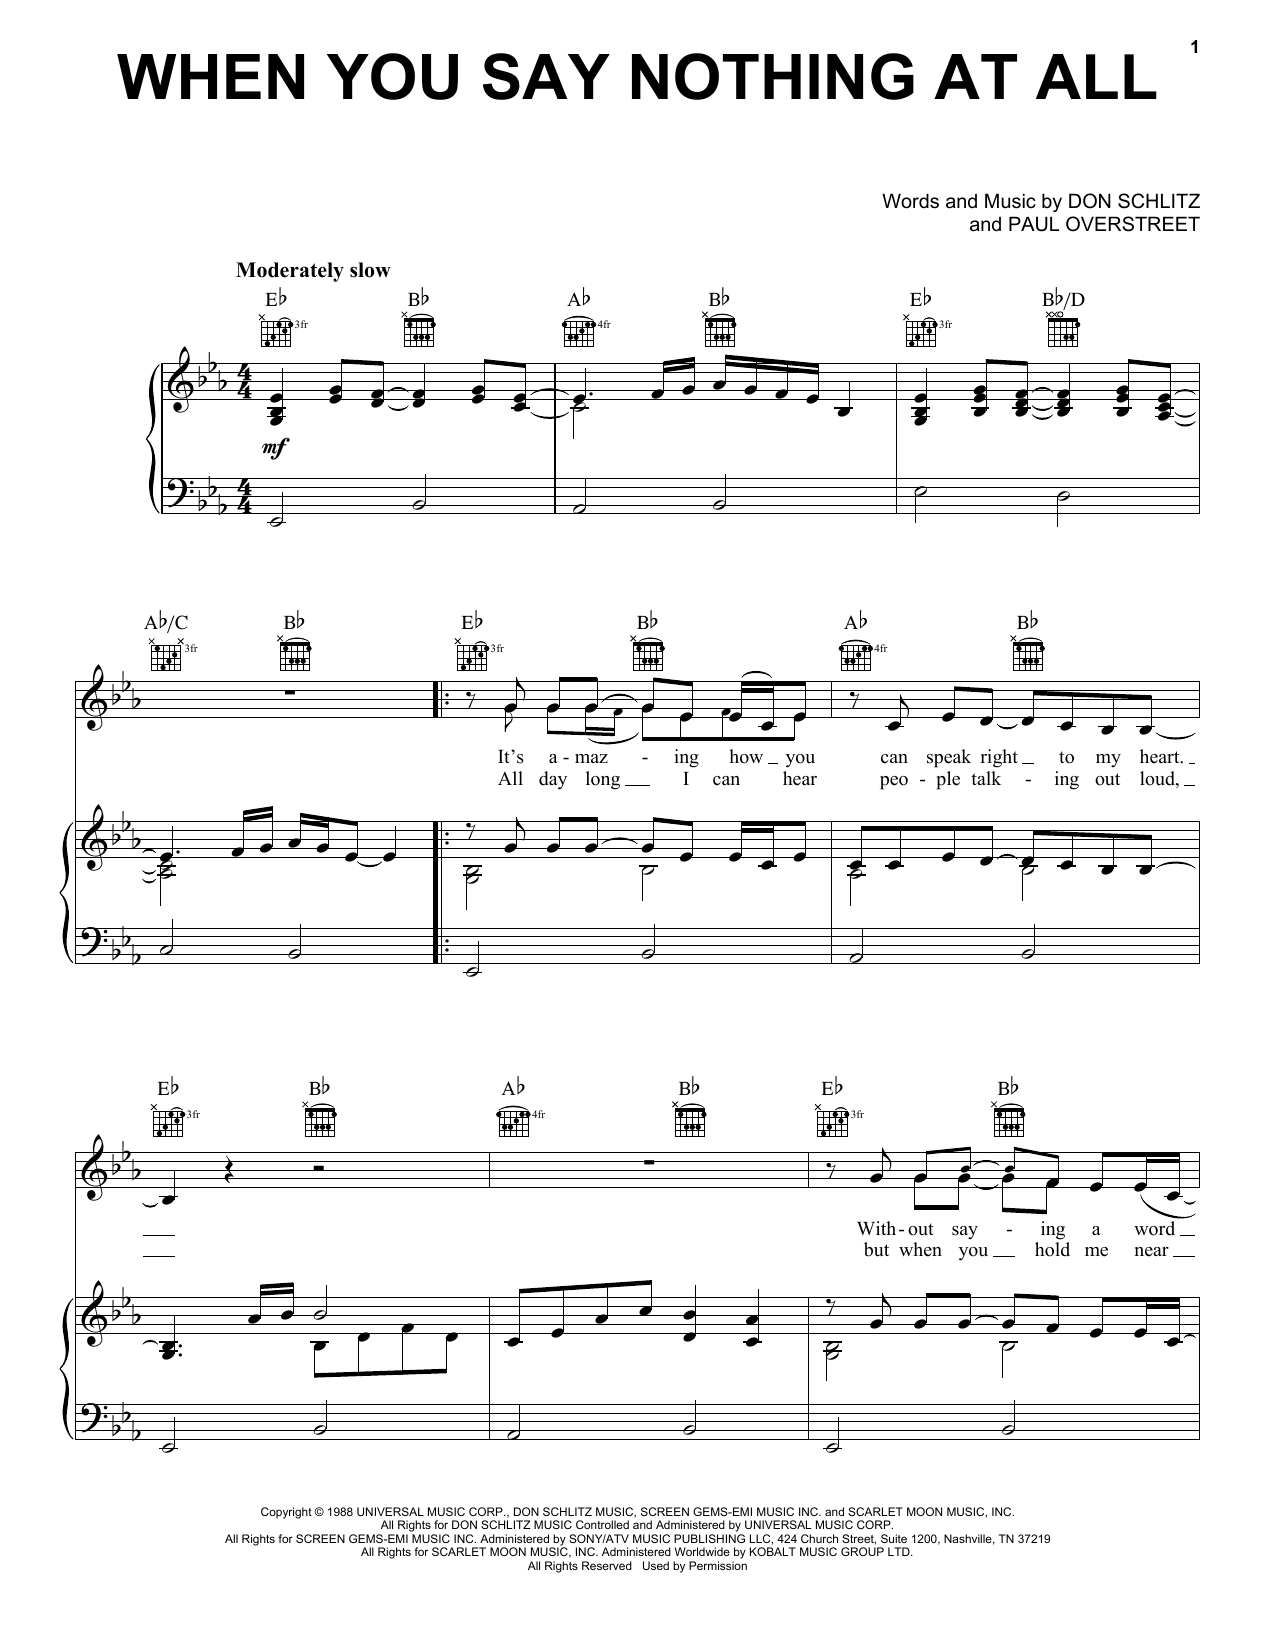 Download Alison Krauss & Union Station When You Say Nothing At All sheet music notes and chords for Piano, Vocal & Guitar (Right-Hand Melody) - Download Printable PDF and start playing in minutes.